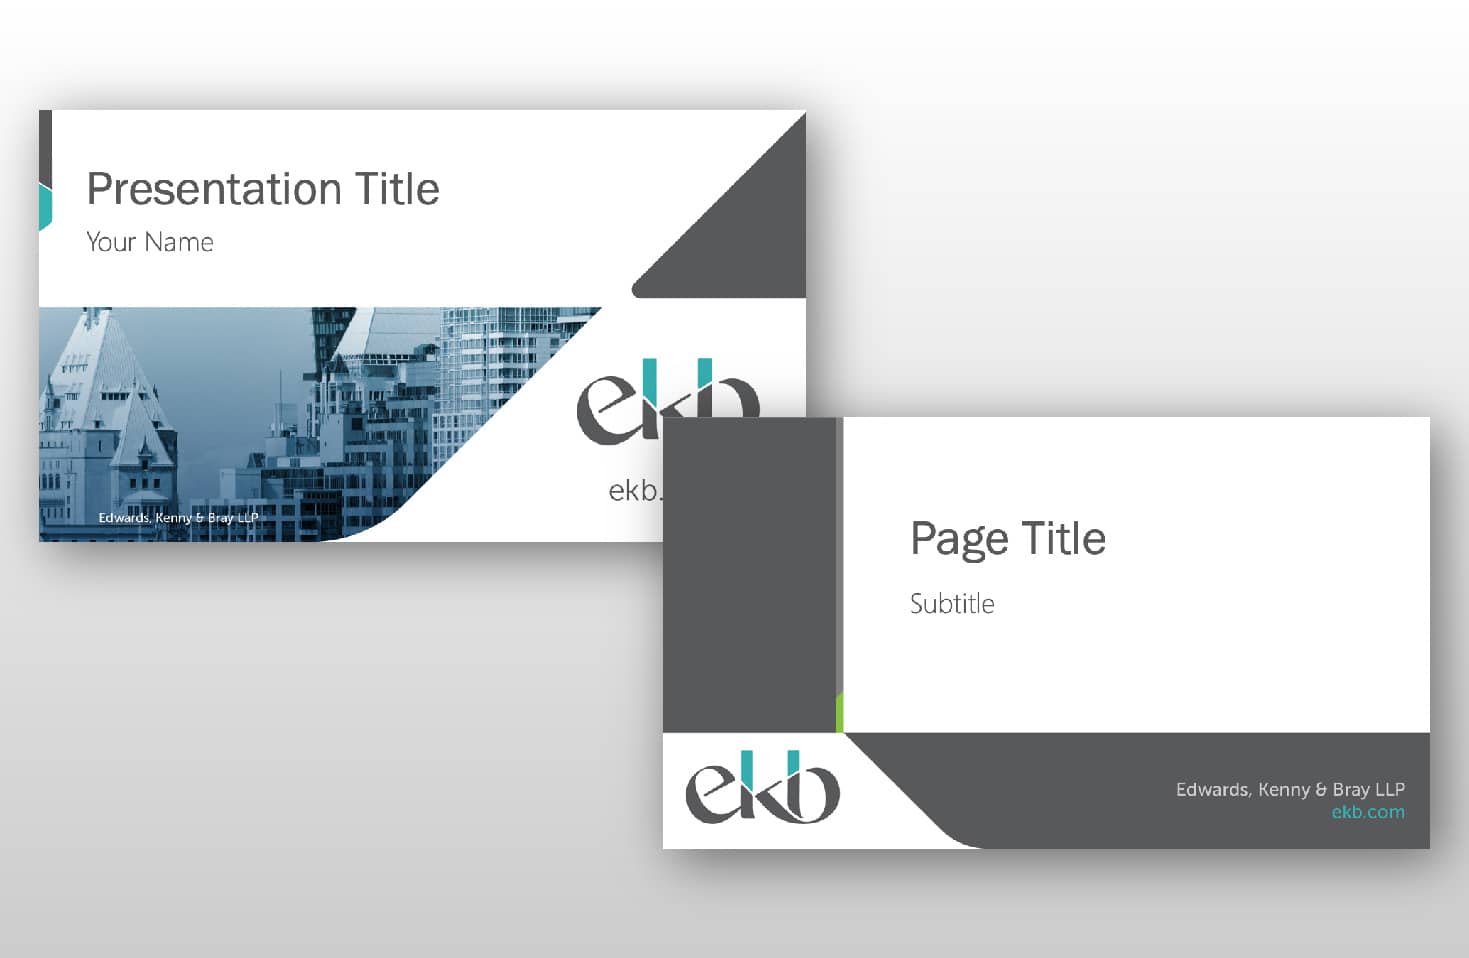 Powerpoint design for law firm